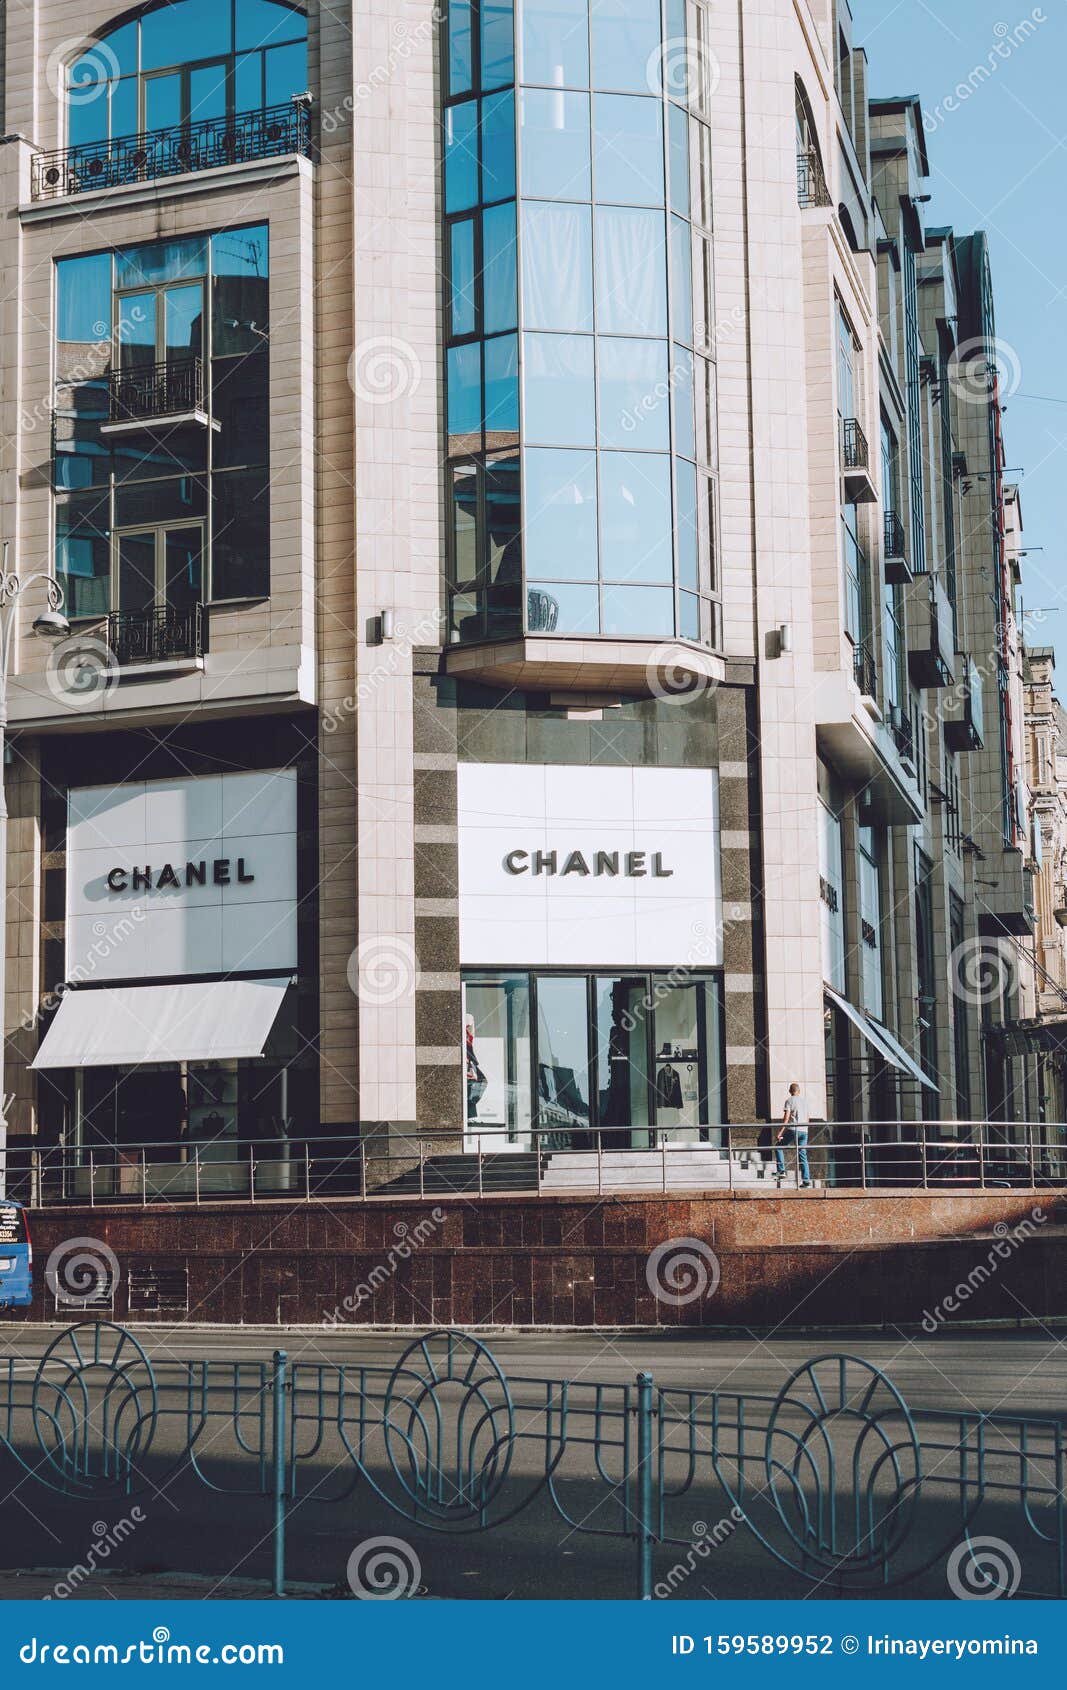 Chanel ups the luxe factor at Galleria boutique